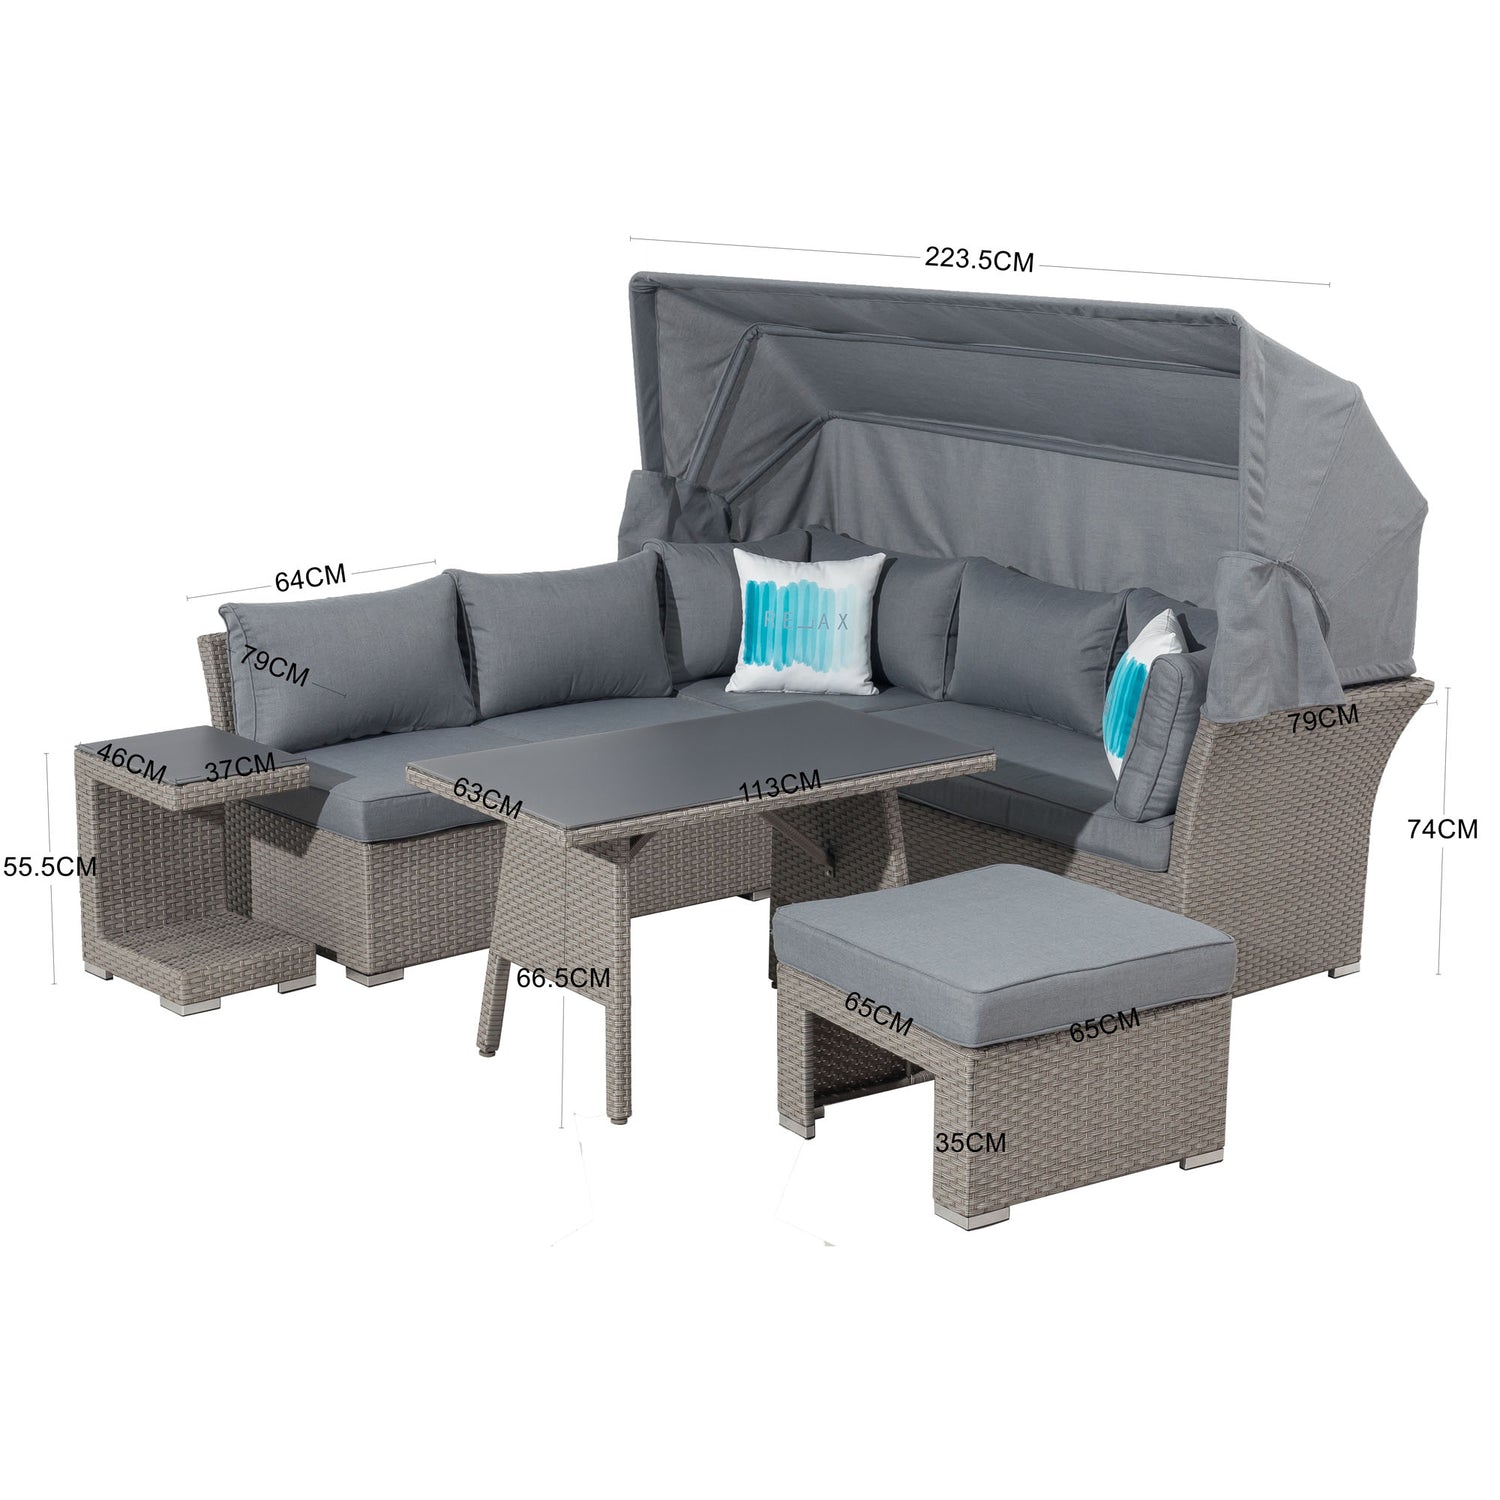 20% EXTRA sparen - Dining Lounge Set / Daybed Relax, variabel stellbar inkl. Sonnendach